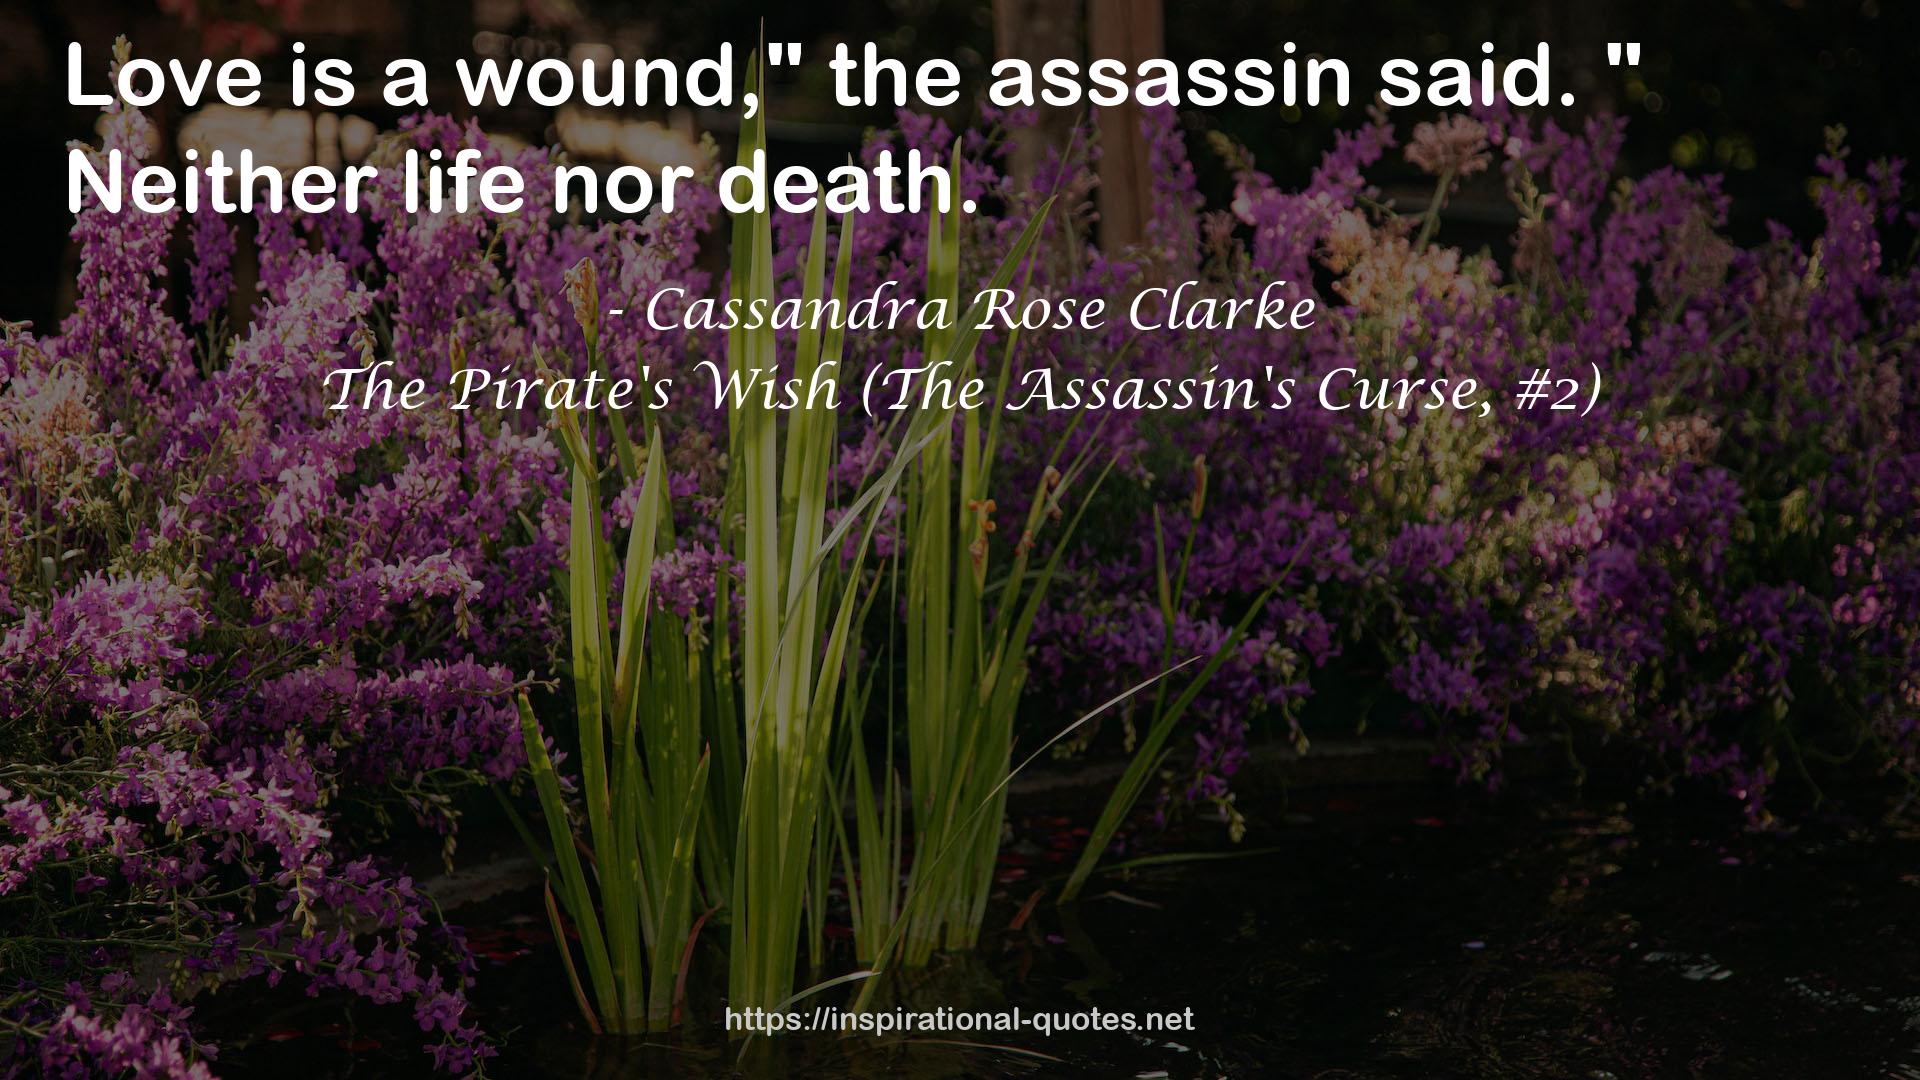 The Pirate's Wish (The Assassin's Curse, #2) QUOTES